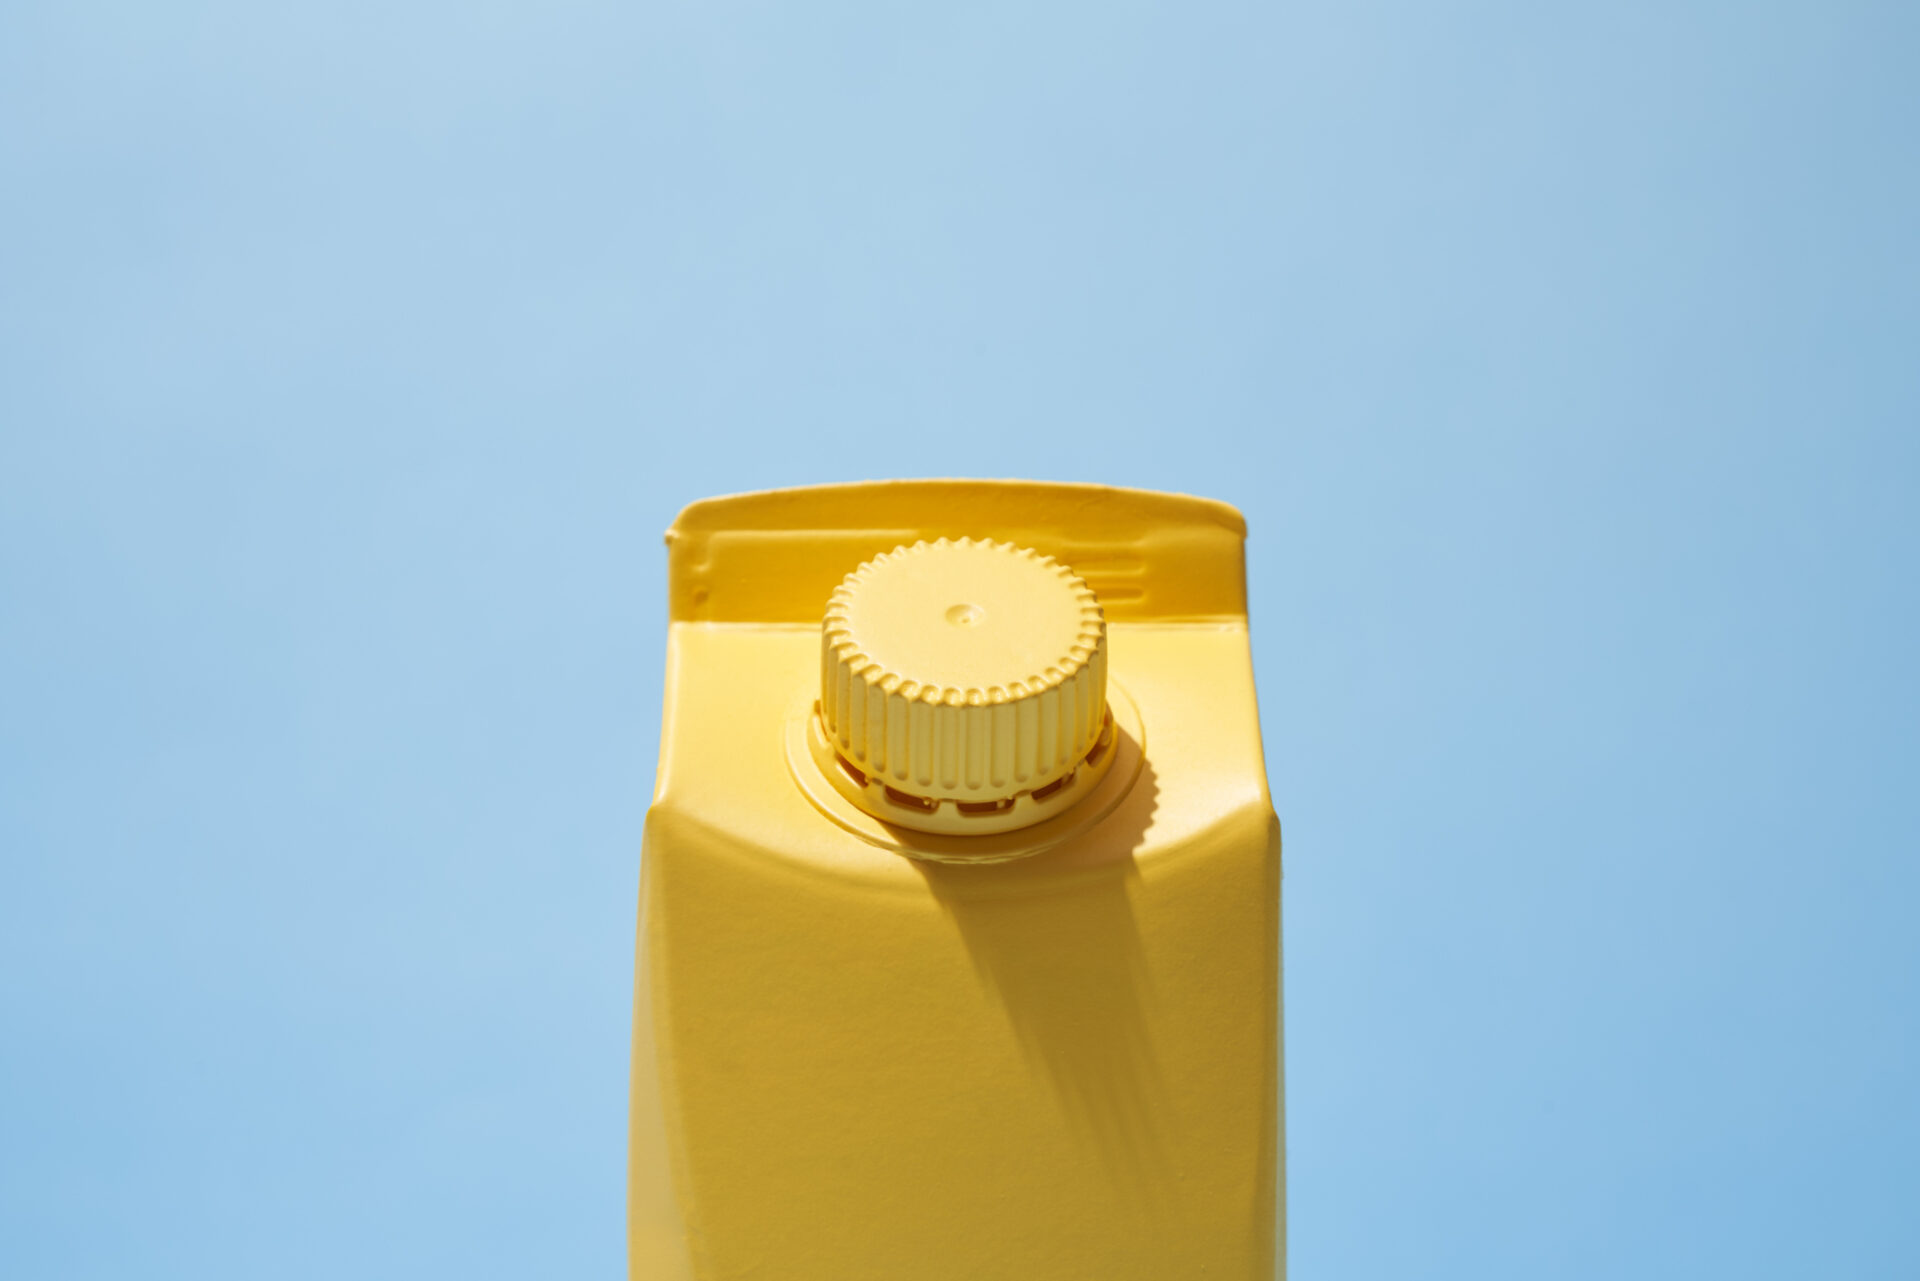 Yellow Small Milk Or Juice Box On Blue Background